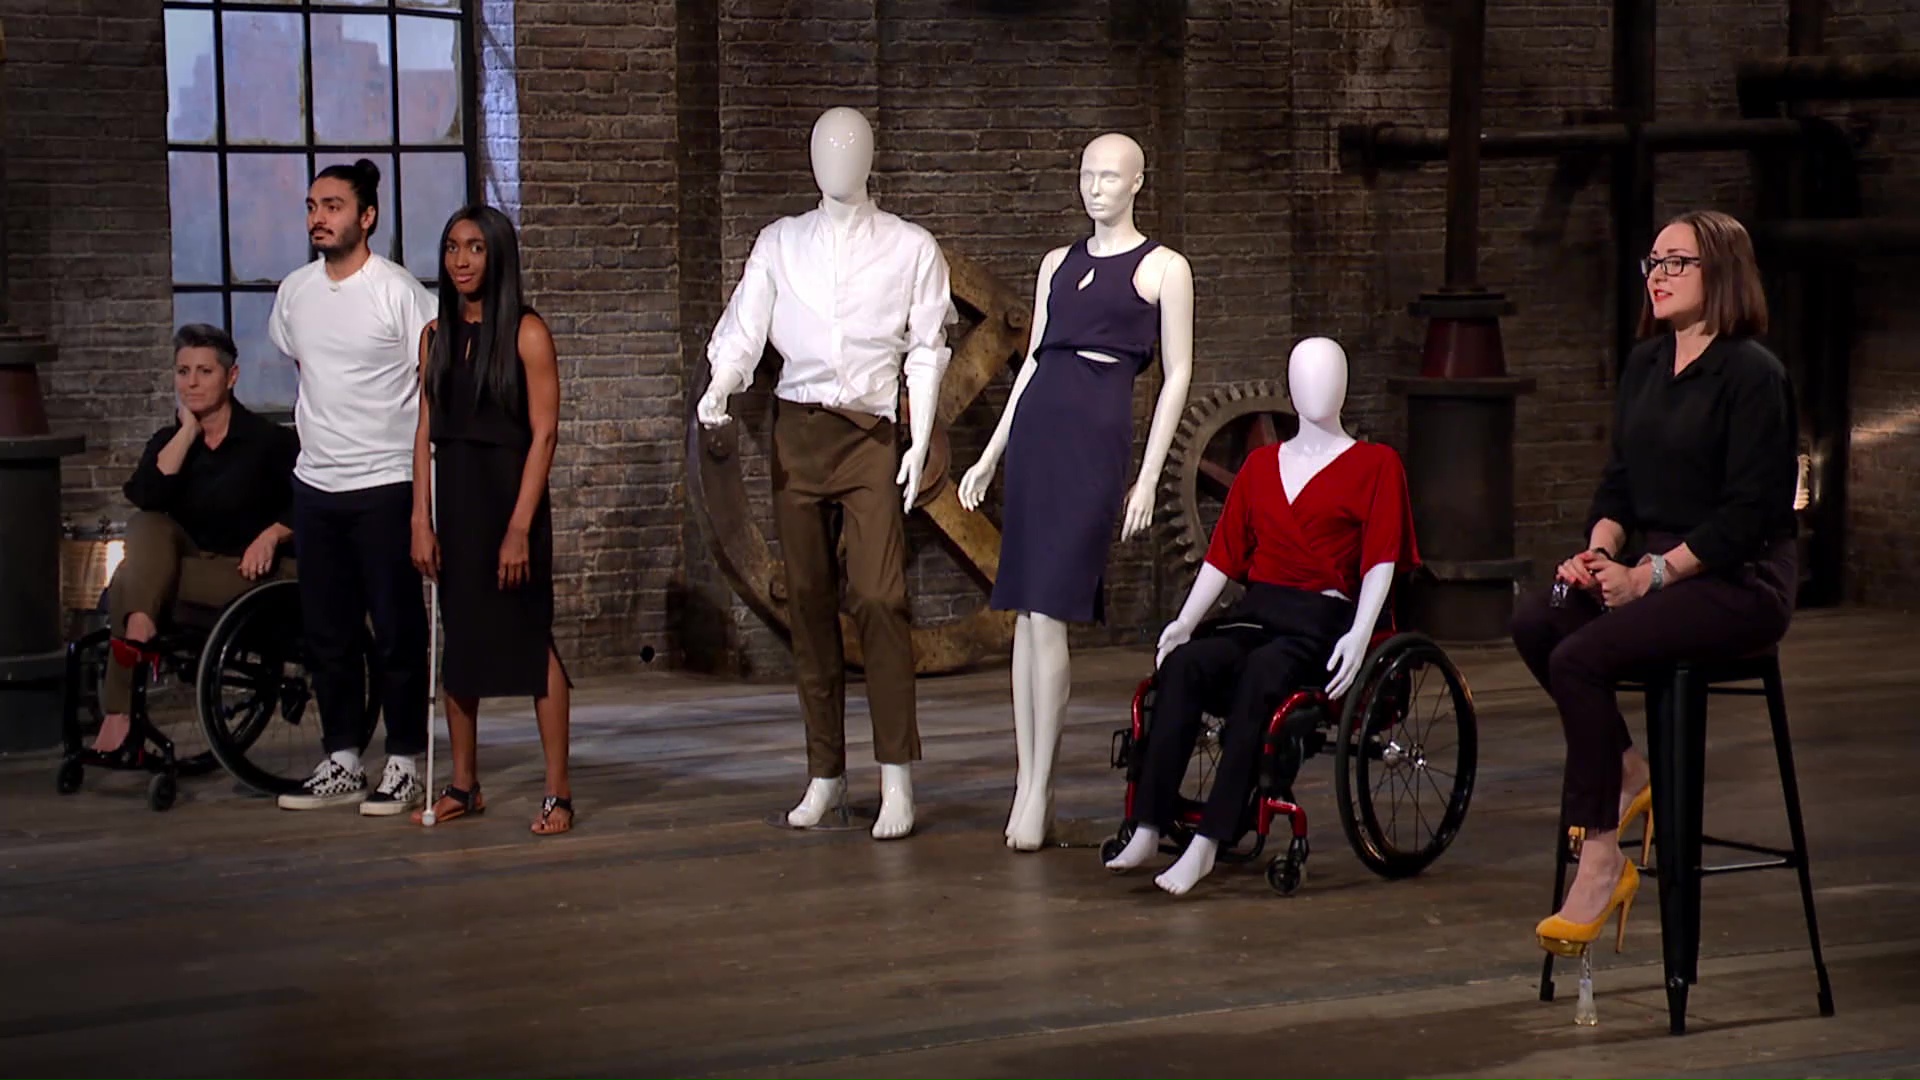 An image of a group of people on dragons den, victoria sits on a stool alongside mannequins, one of which is in a wheelchair